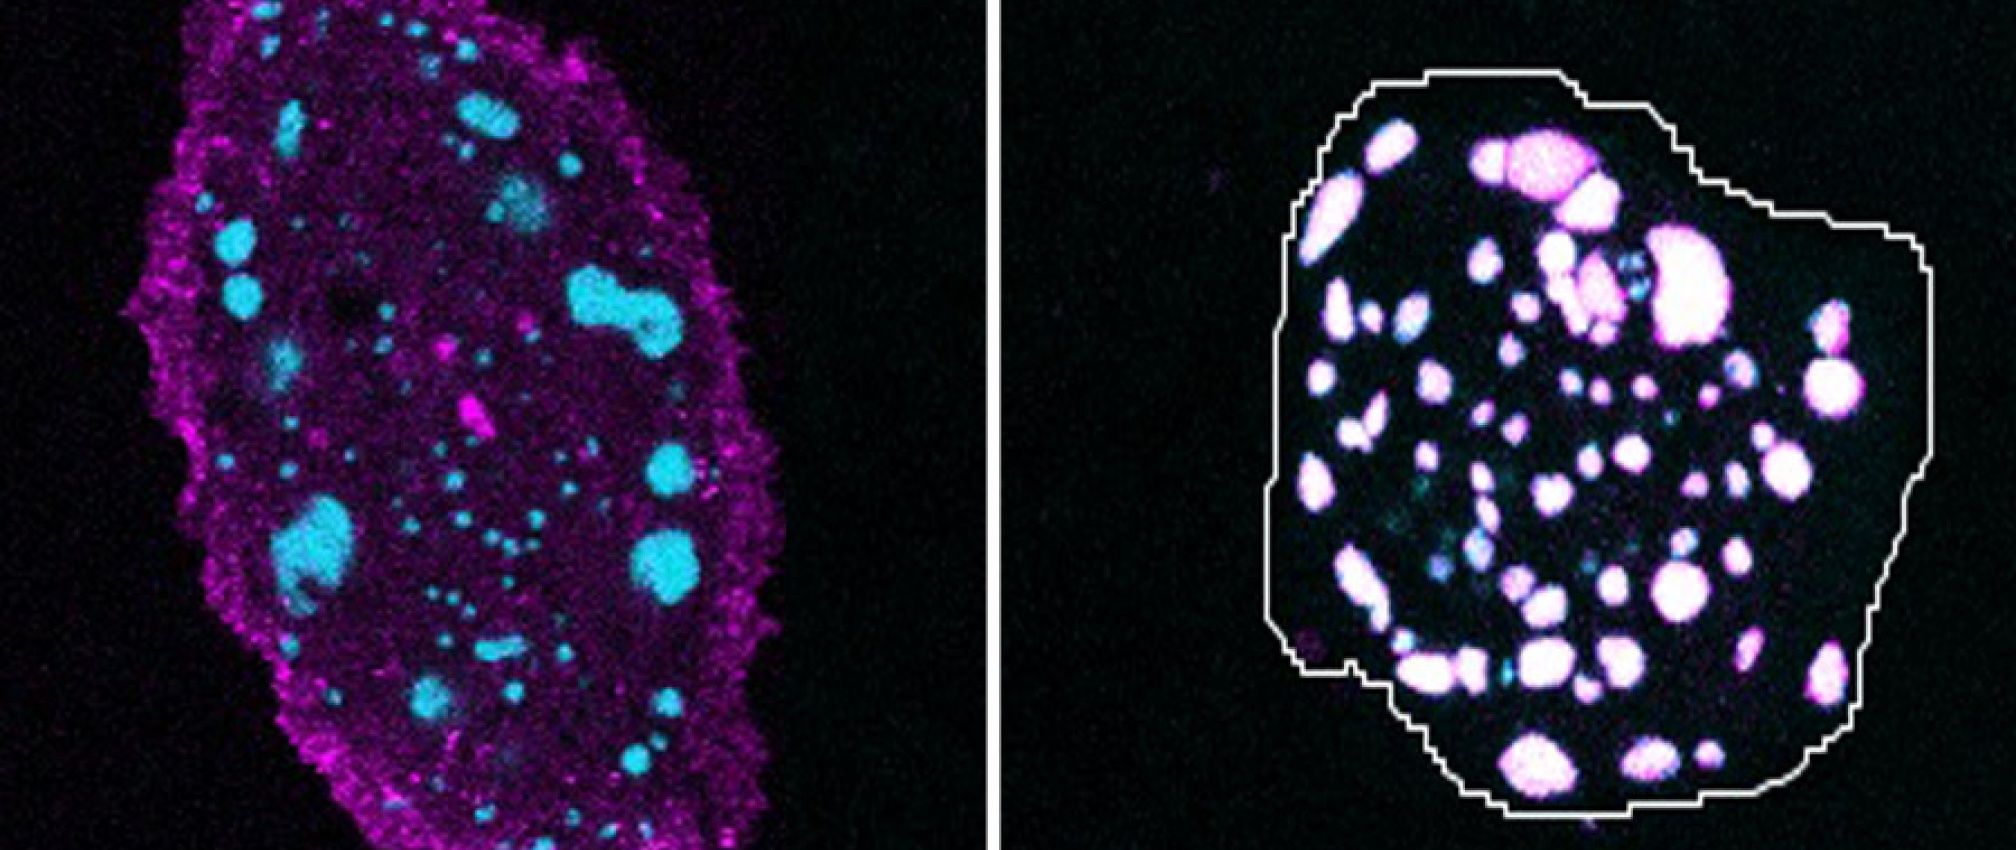 LRP6 (magenta) is internalized and colocalizes with Axin (cyan) upon Wnt ligand activation.  Left panel shows untreated RPE cells.  Right panel  shows RPE cells treated with Wnt3a.